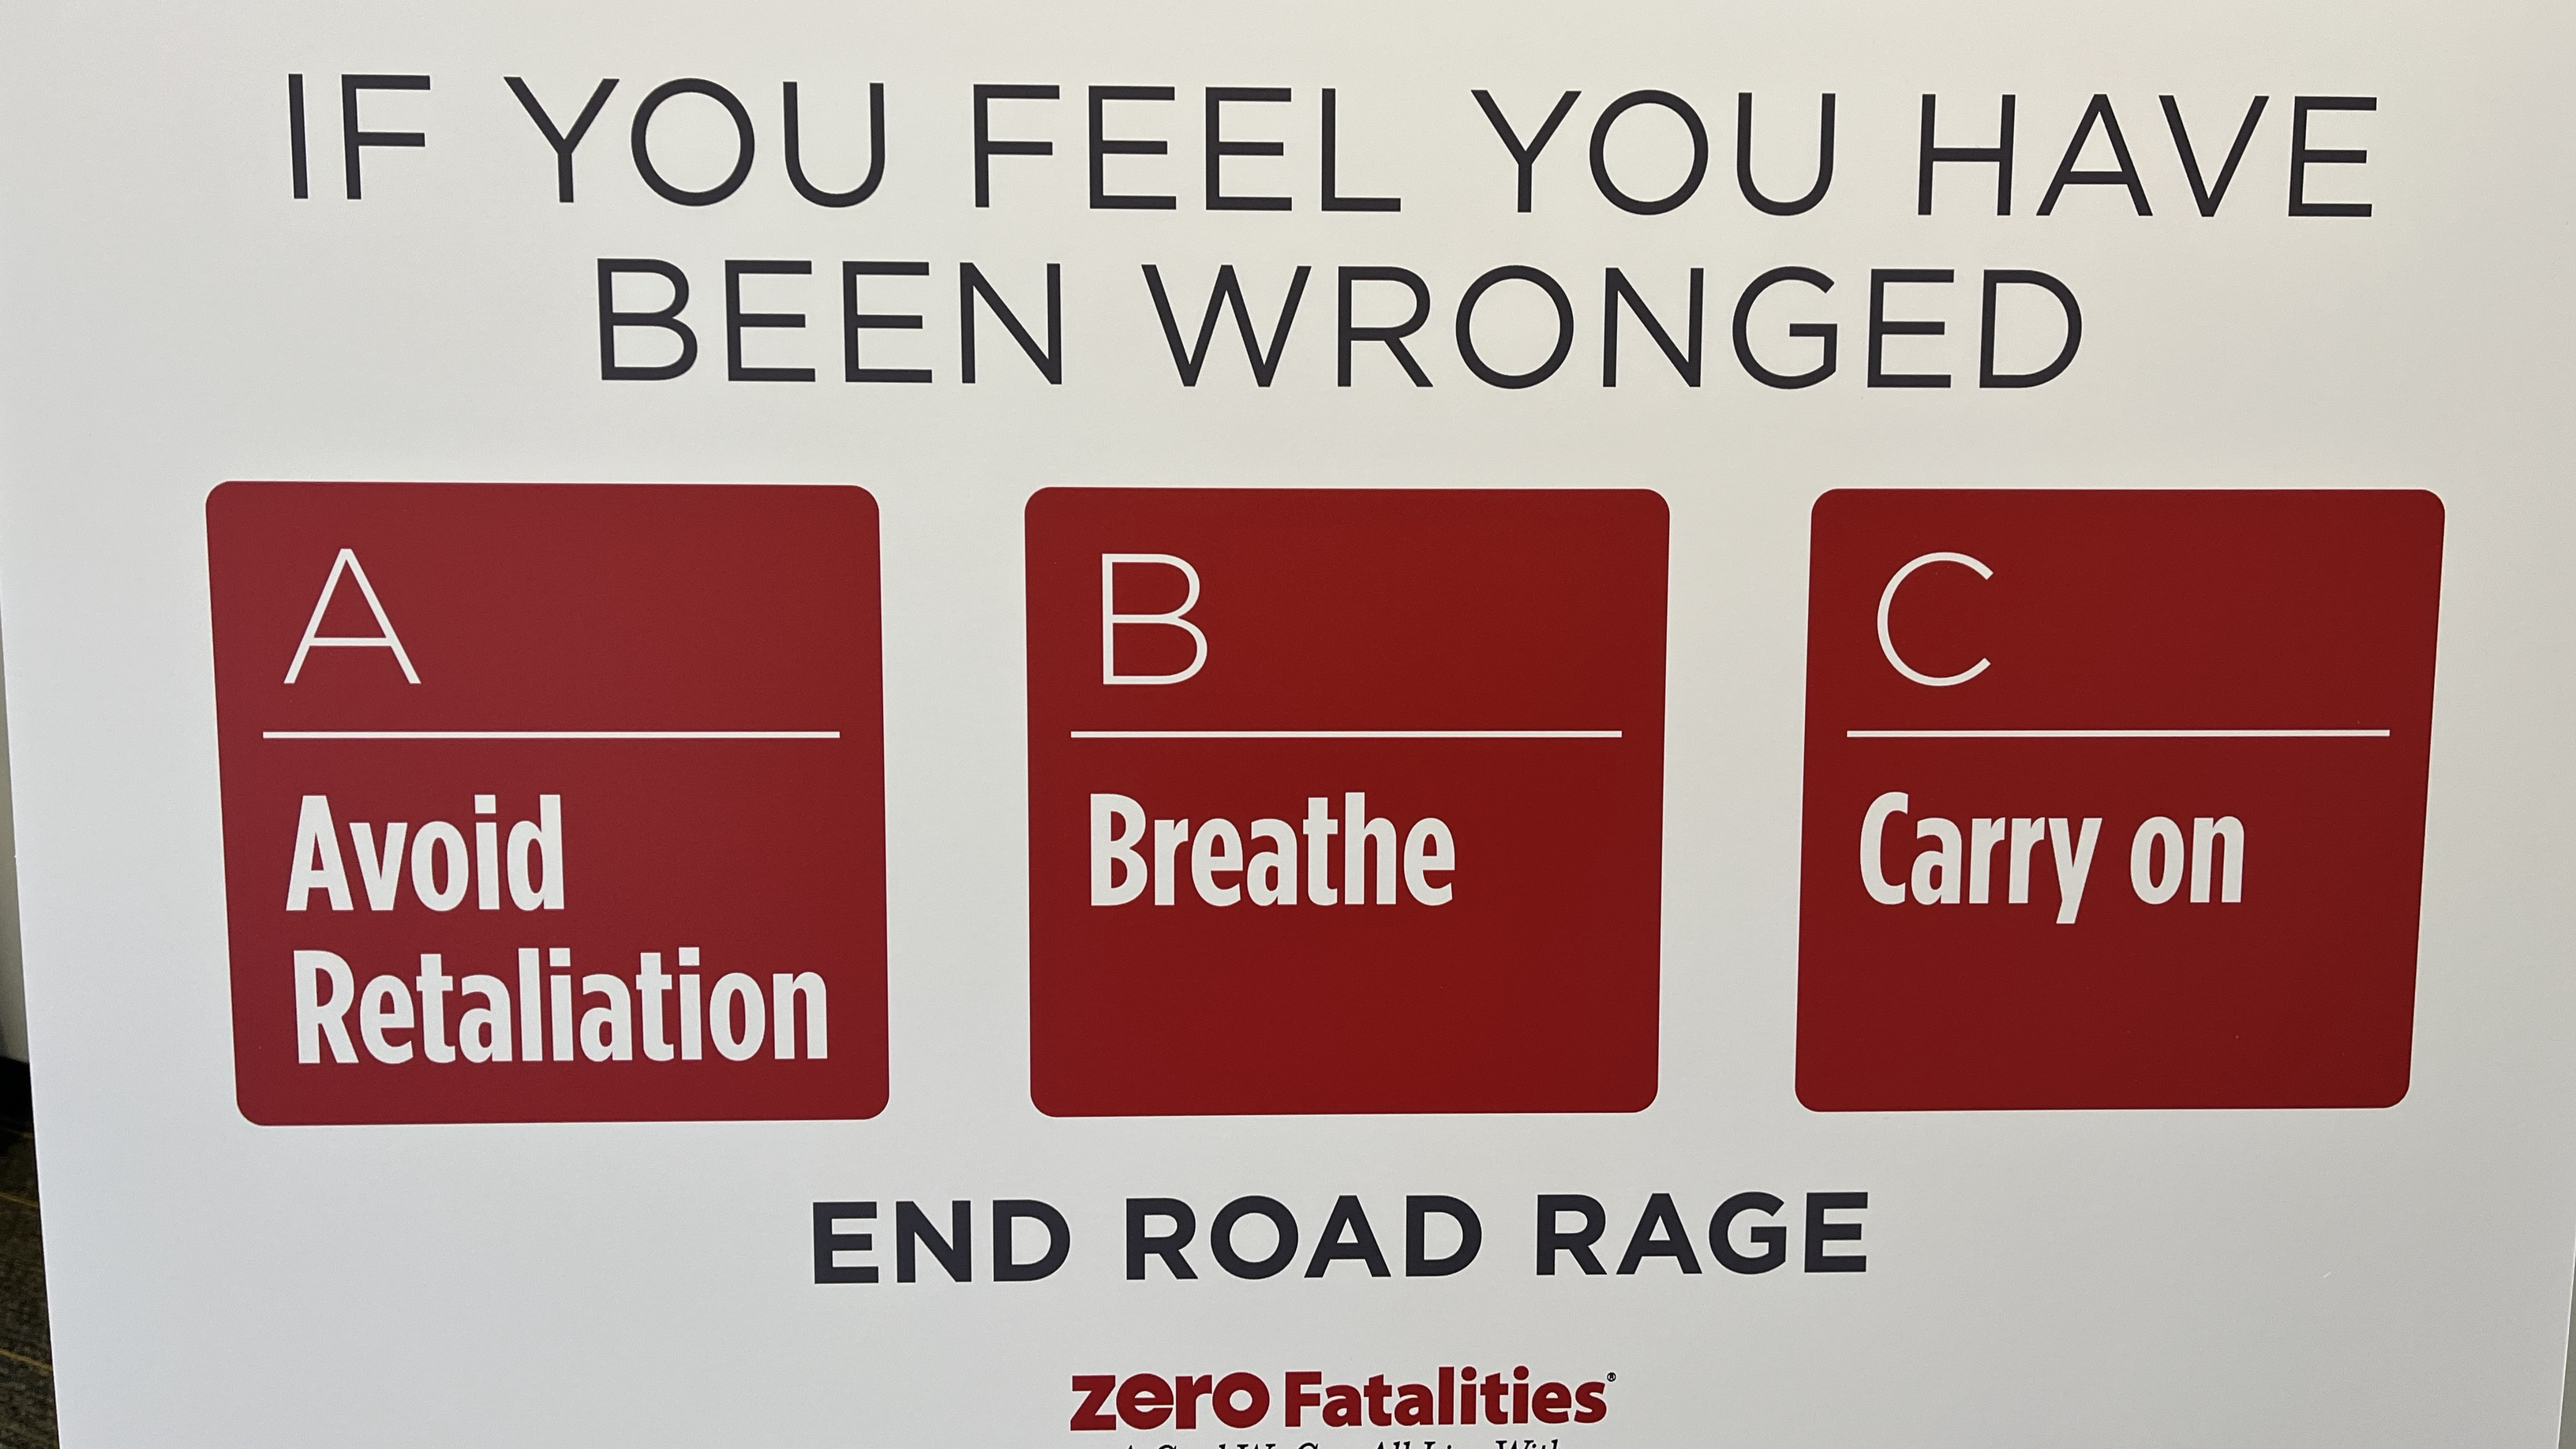 a road rage graphic asks what to do if you've been wronged on the road...